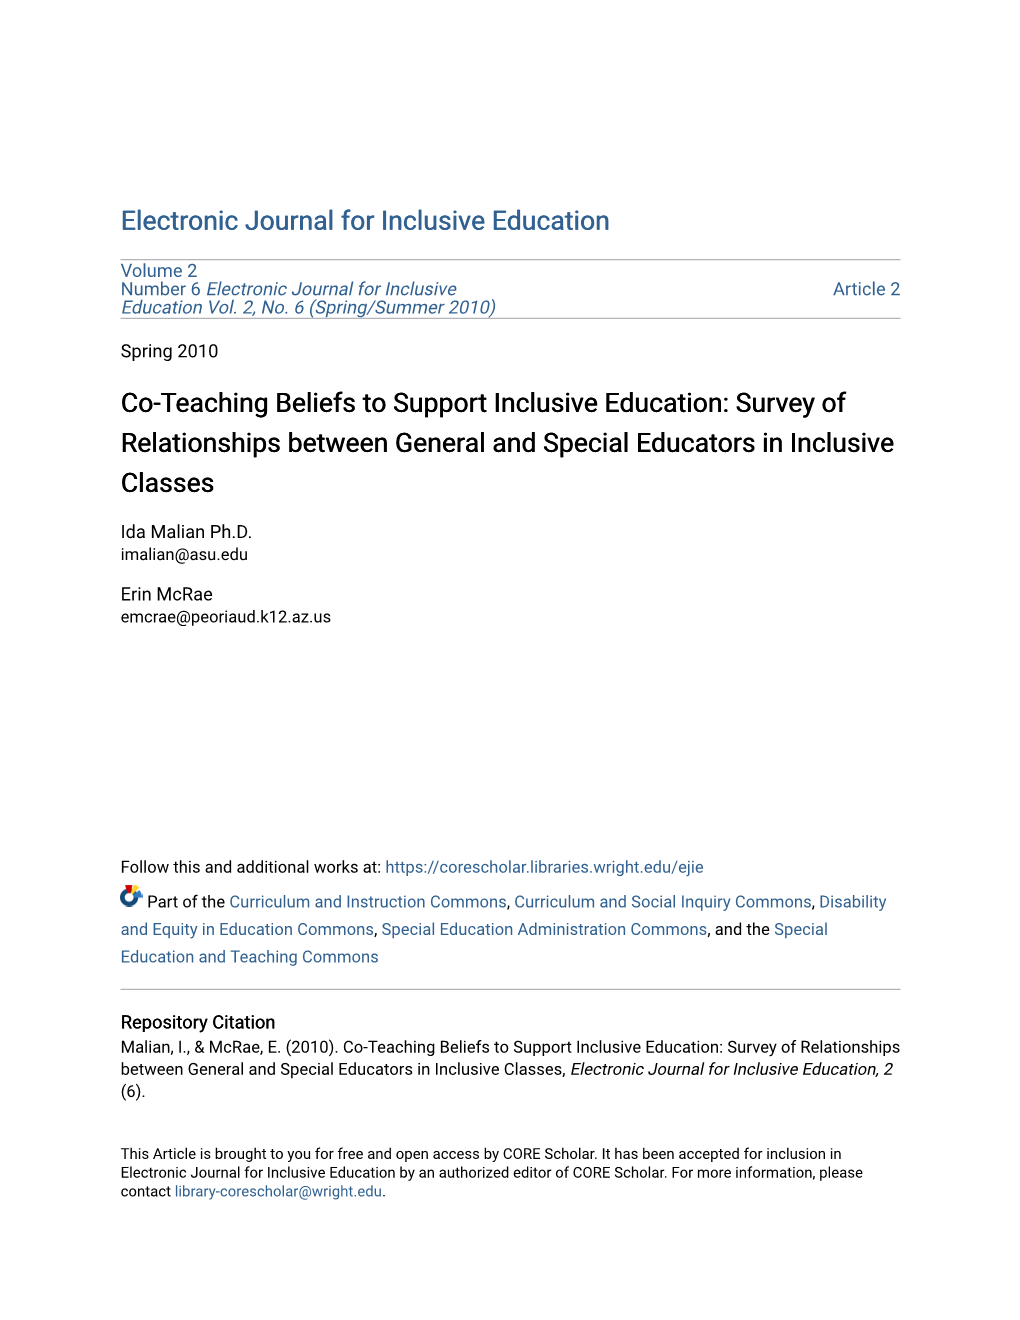 Co-Teaching Beliefs to Support Inclusive Education: Survey of Relationships Between General and Special Educators in Inclusive Classes